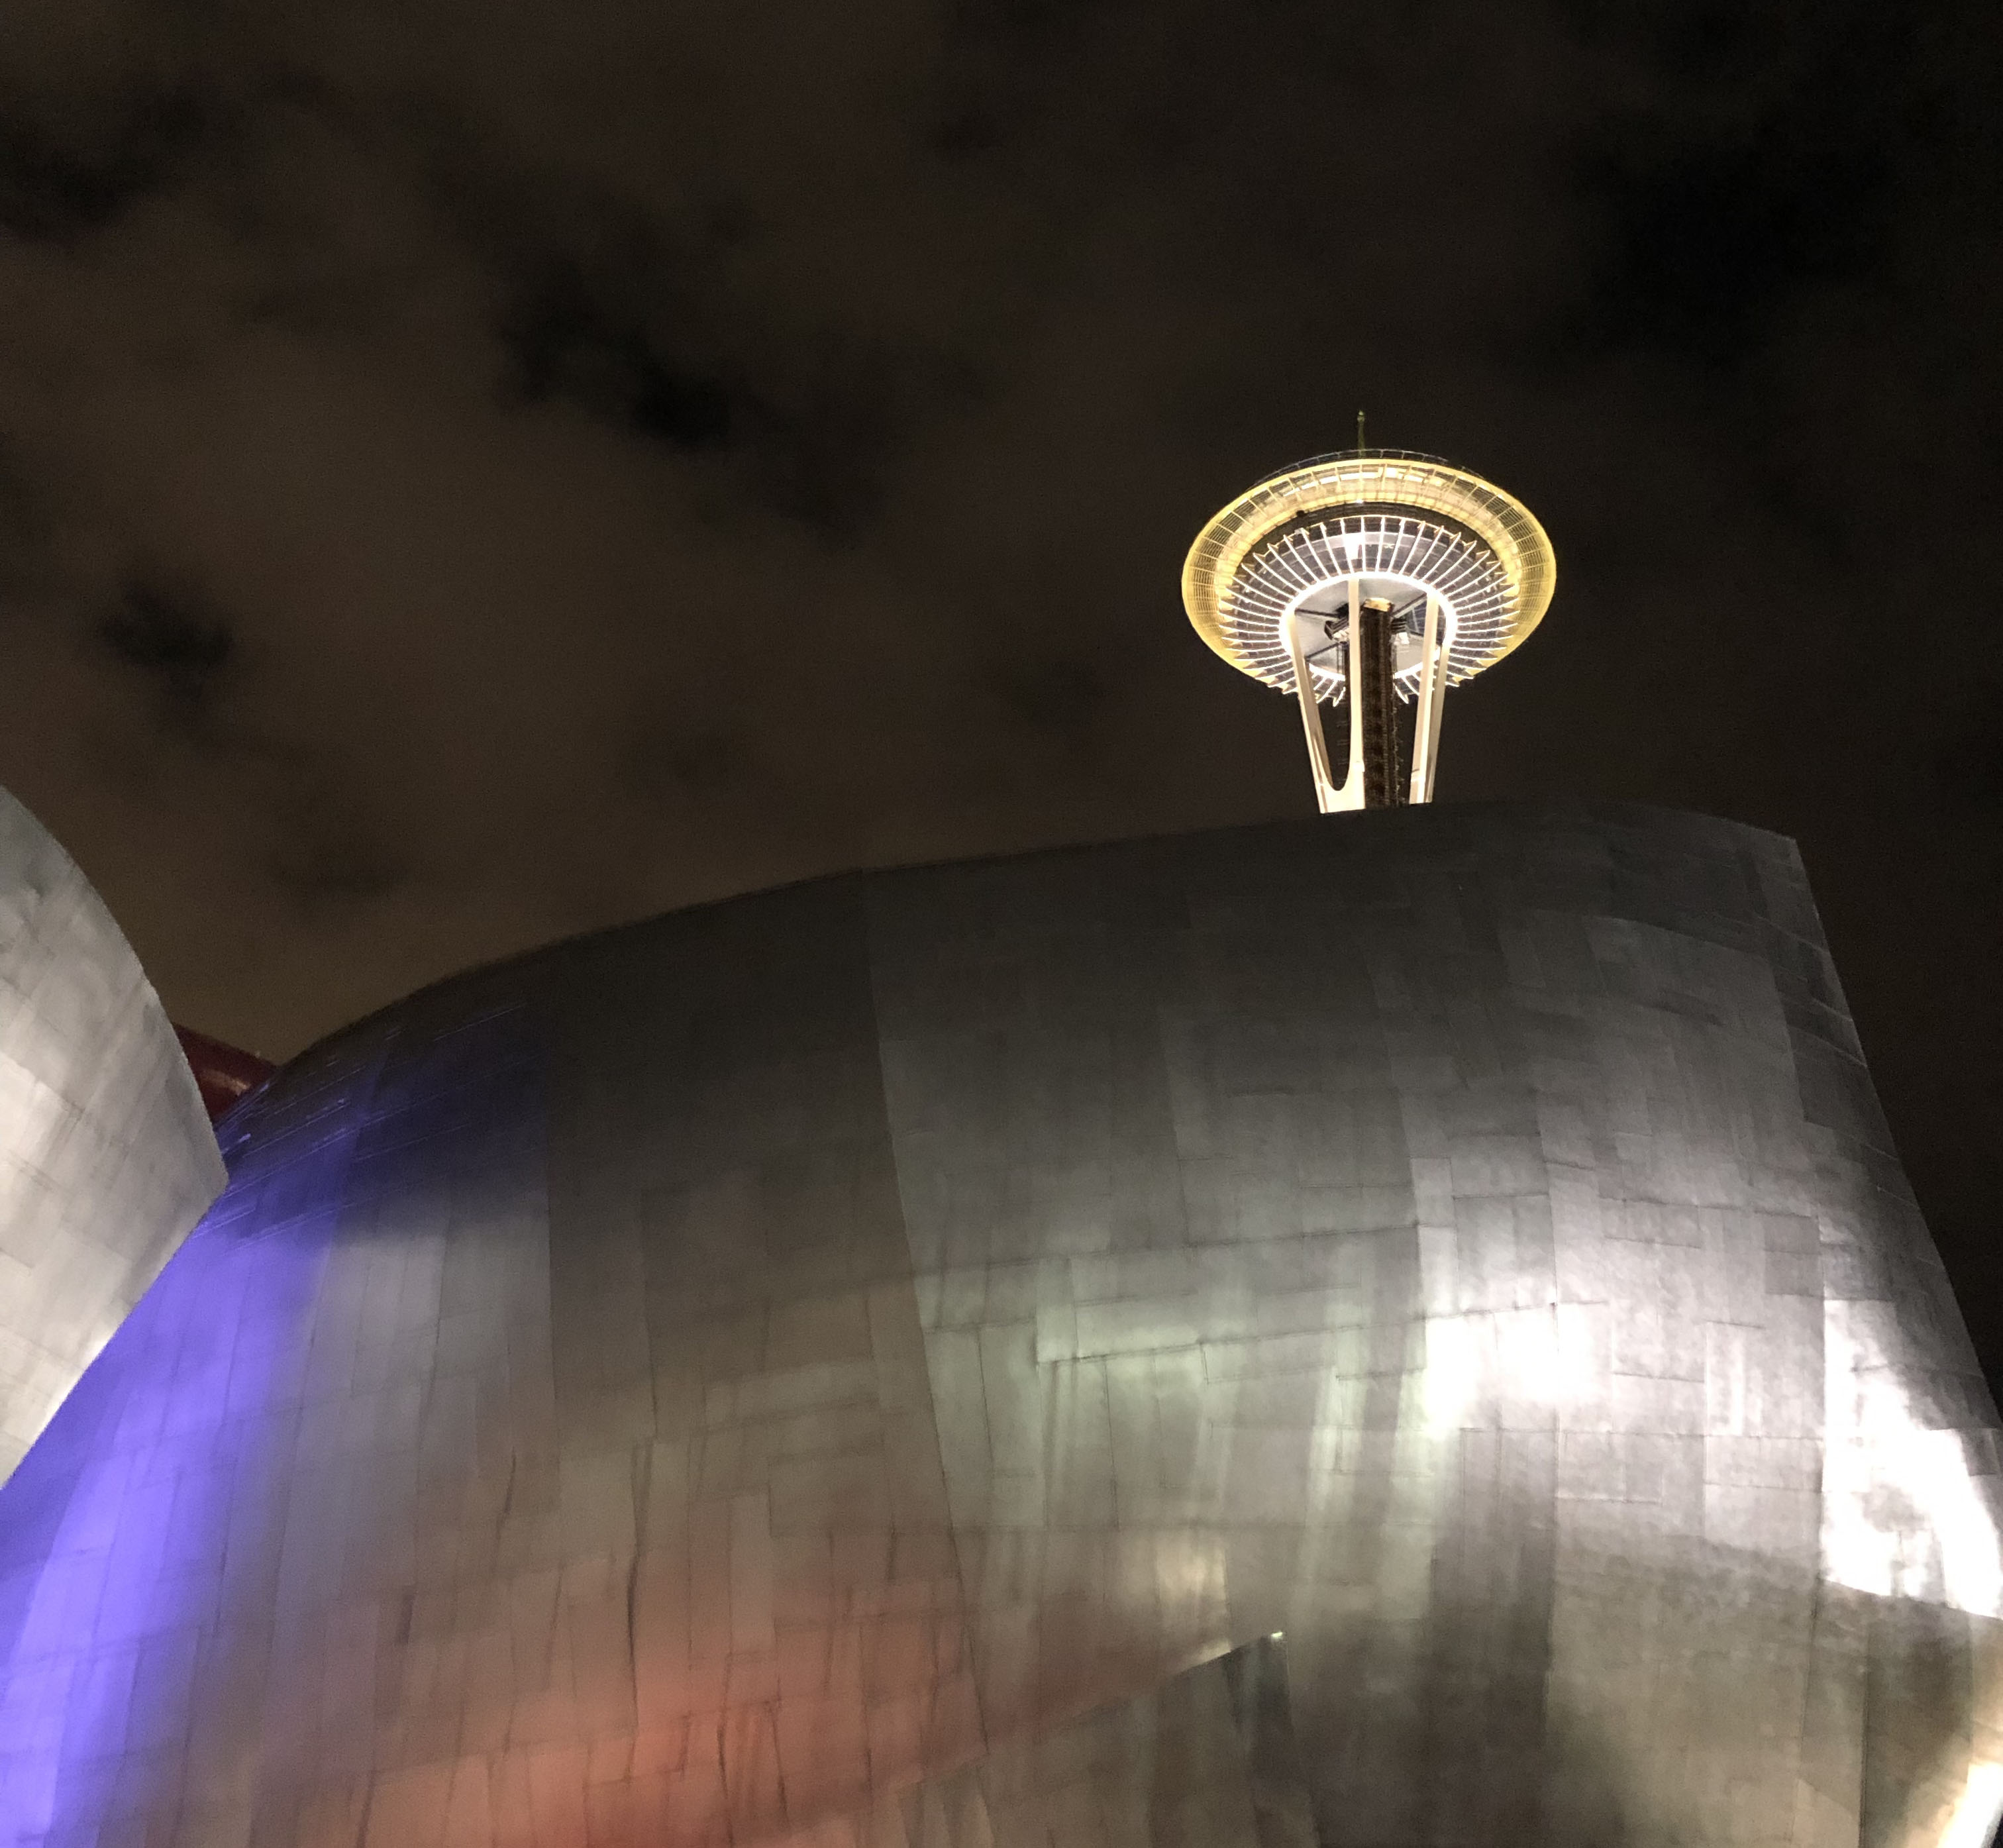 Seattle Space Needle Lit Up At Night